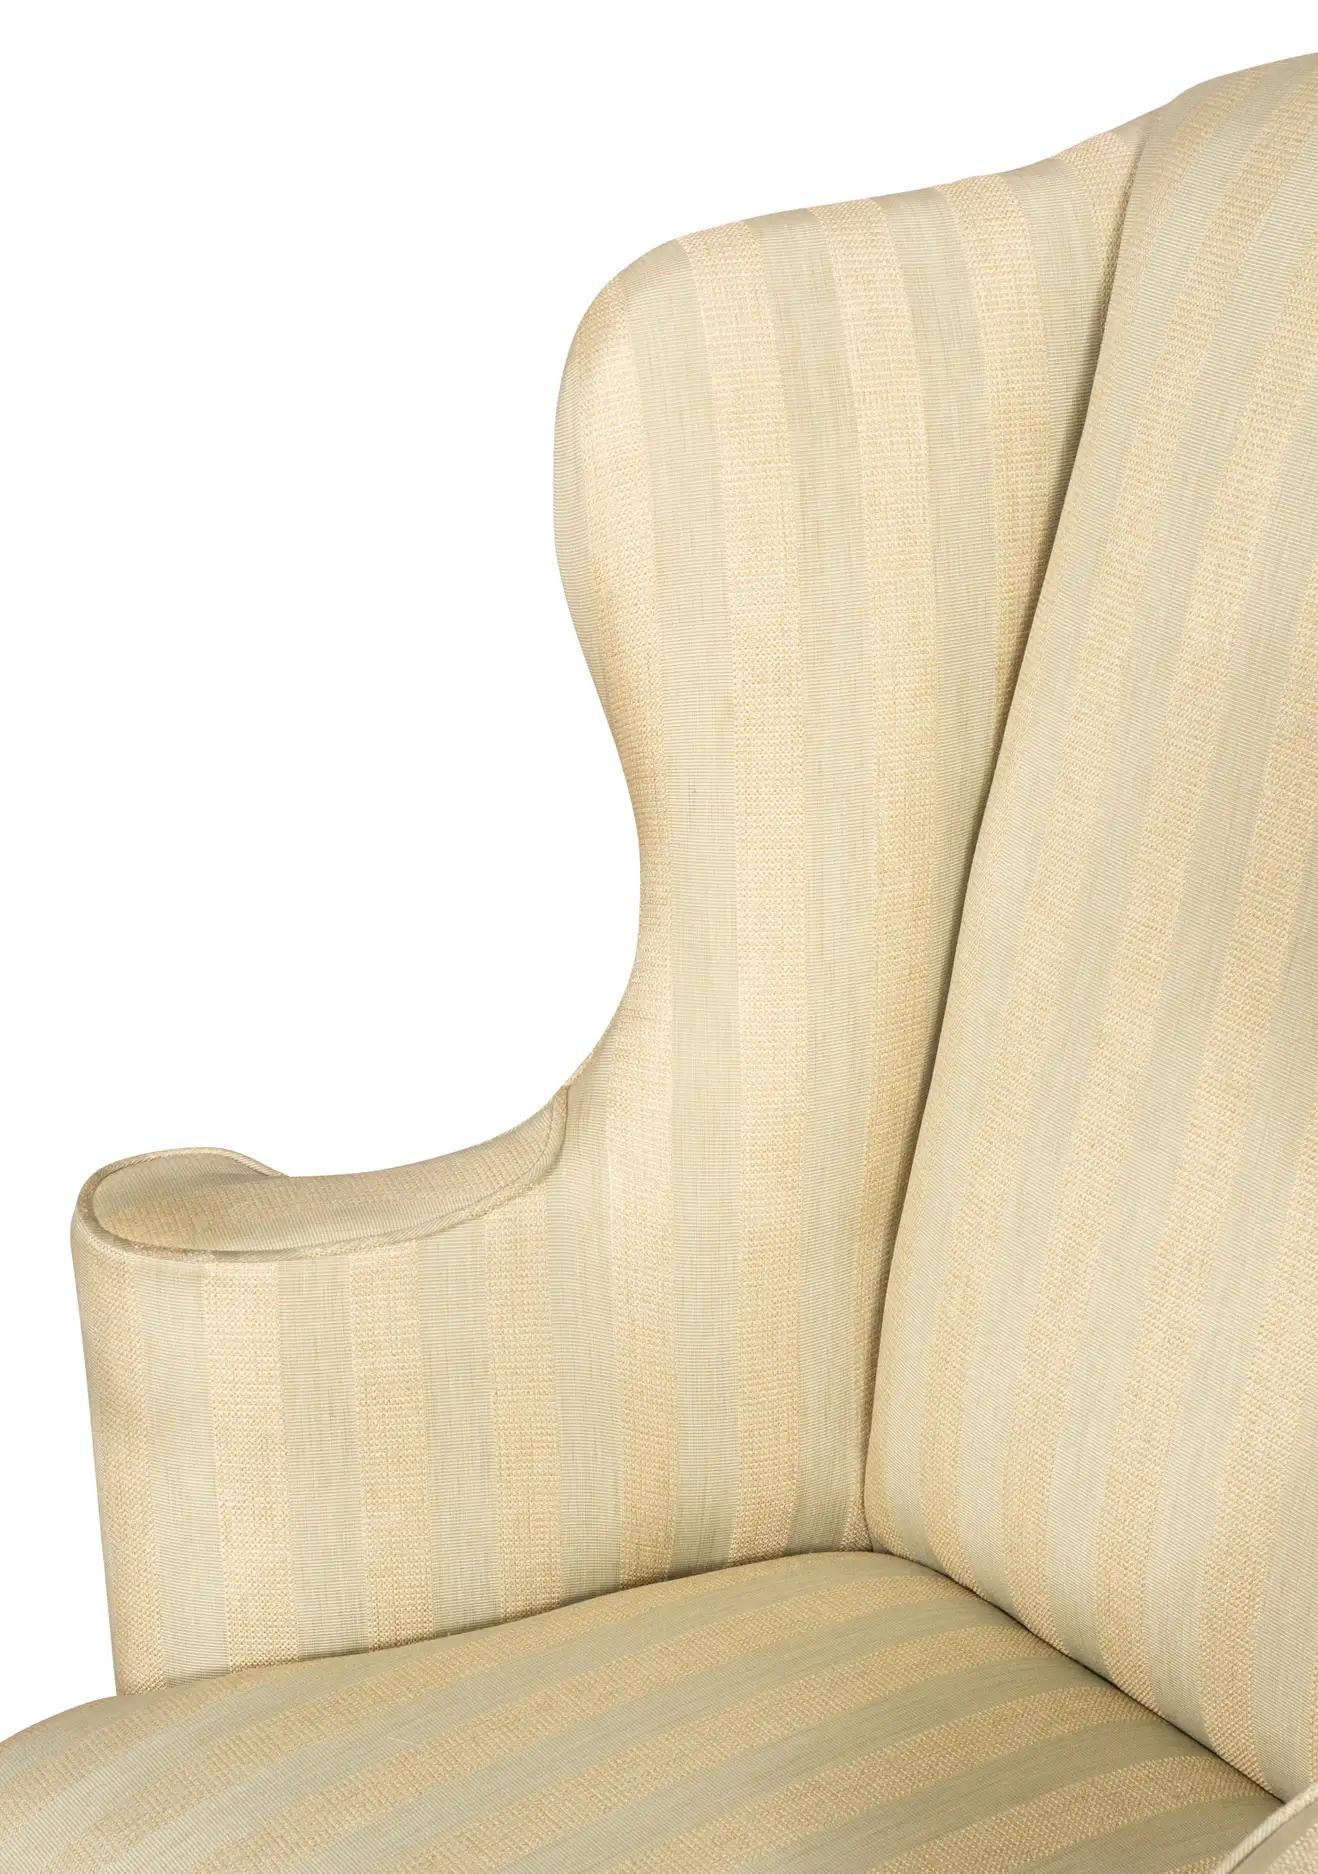 Massachusetts Queen Anne Mahogany Wing Chair For Sale 2